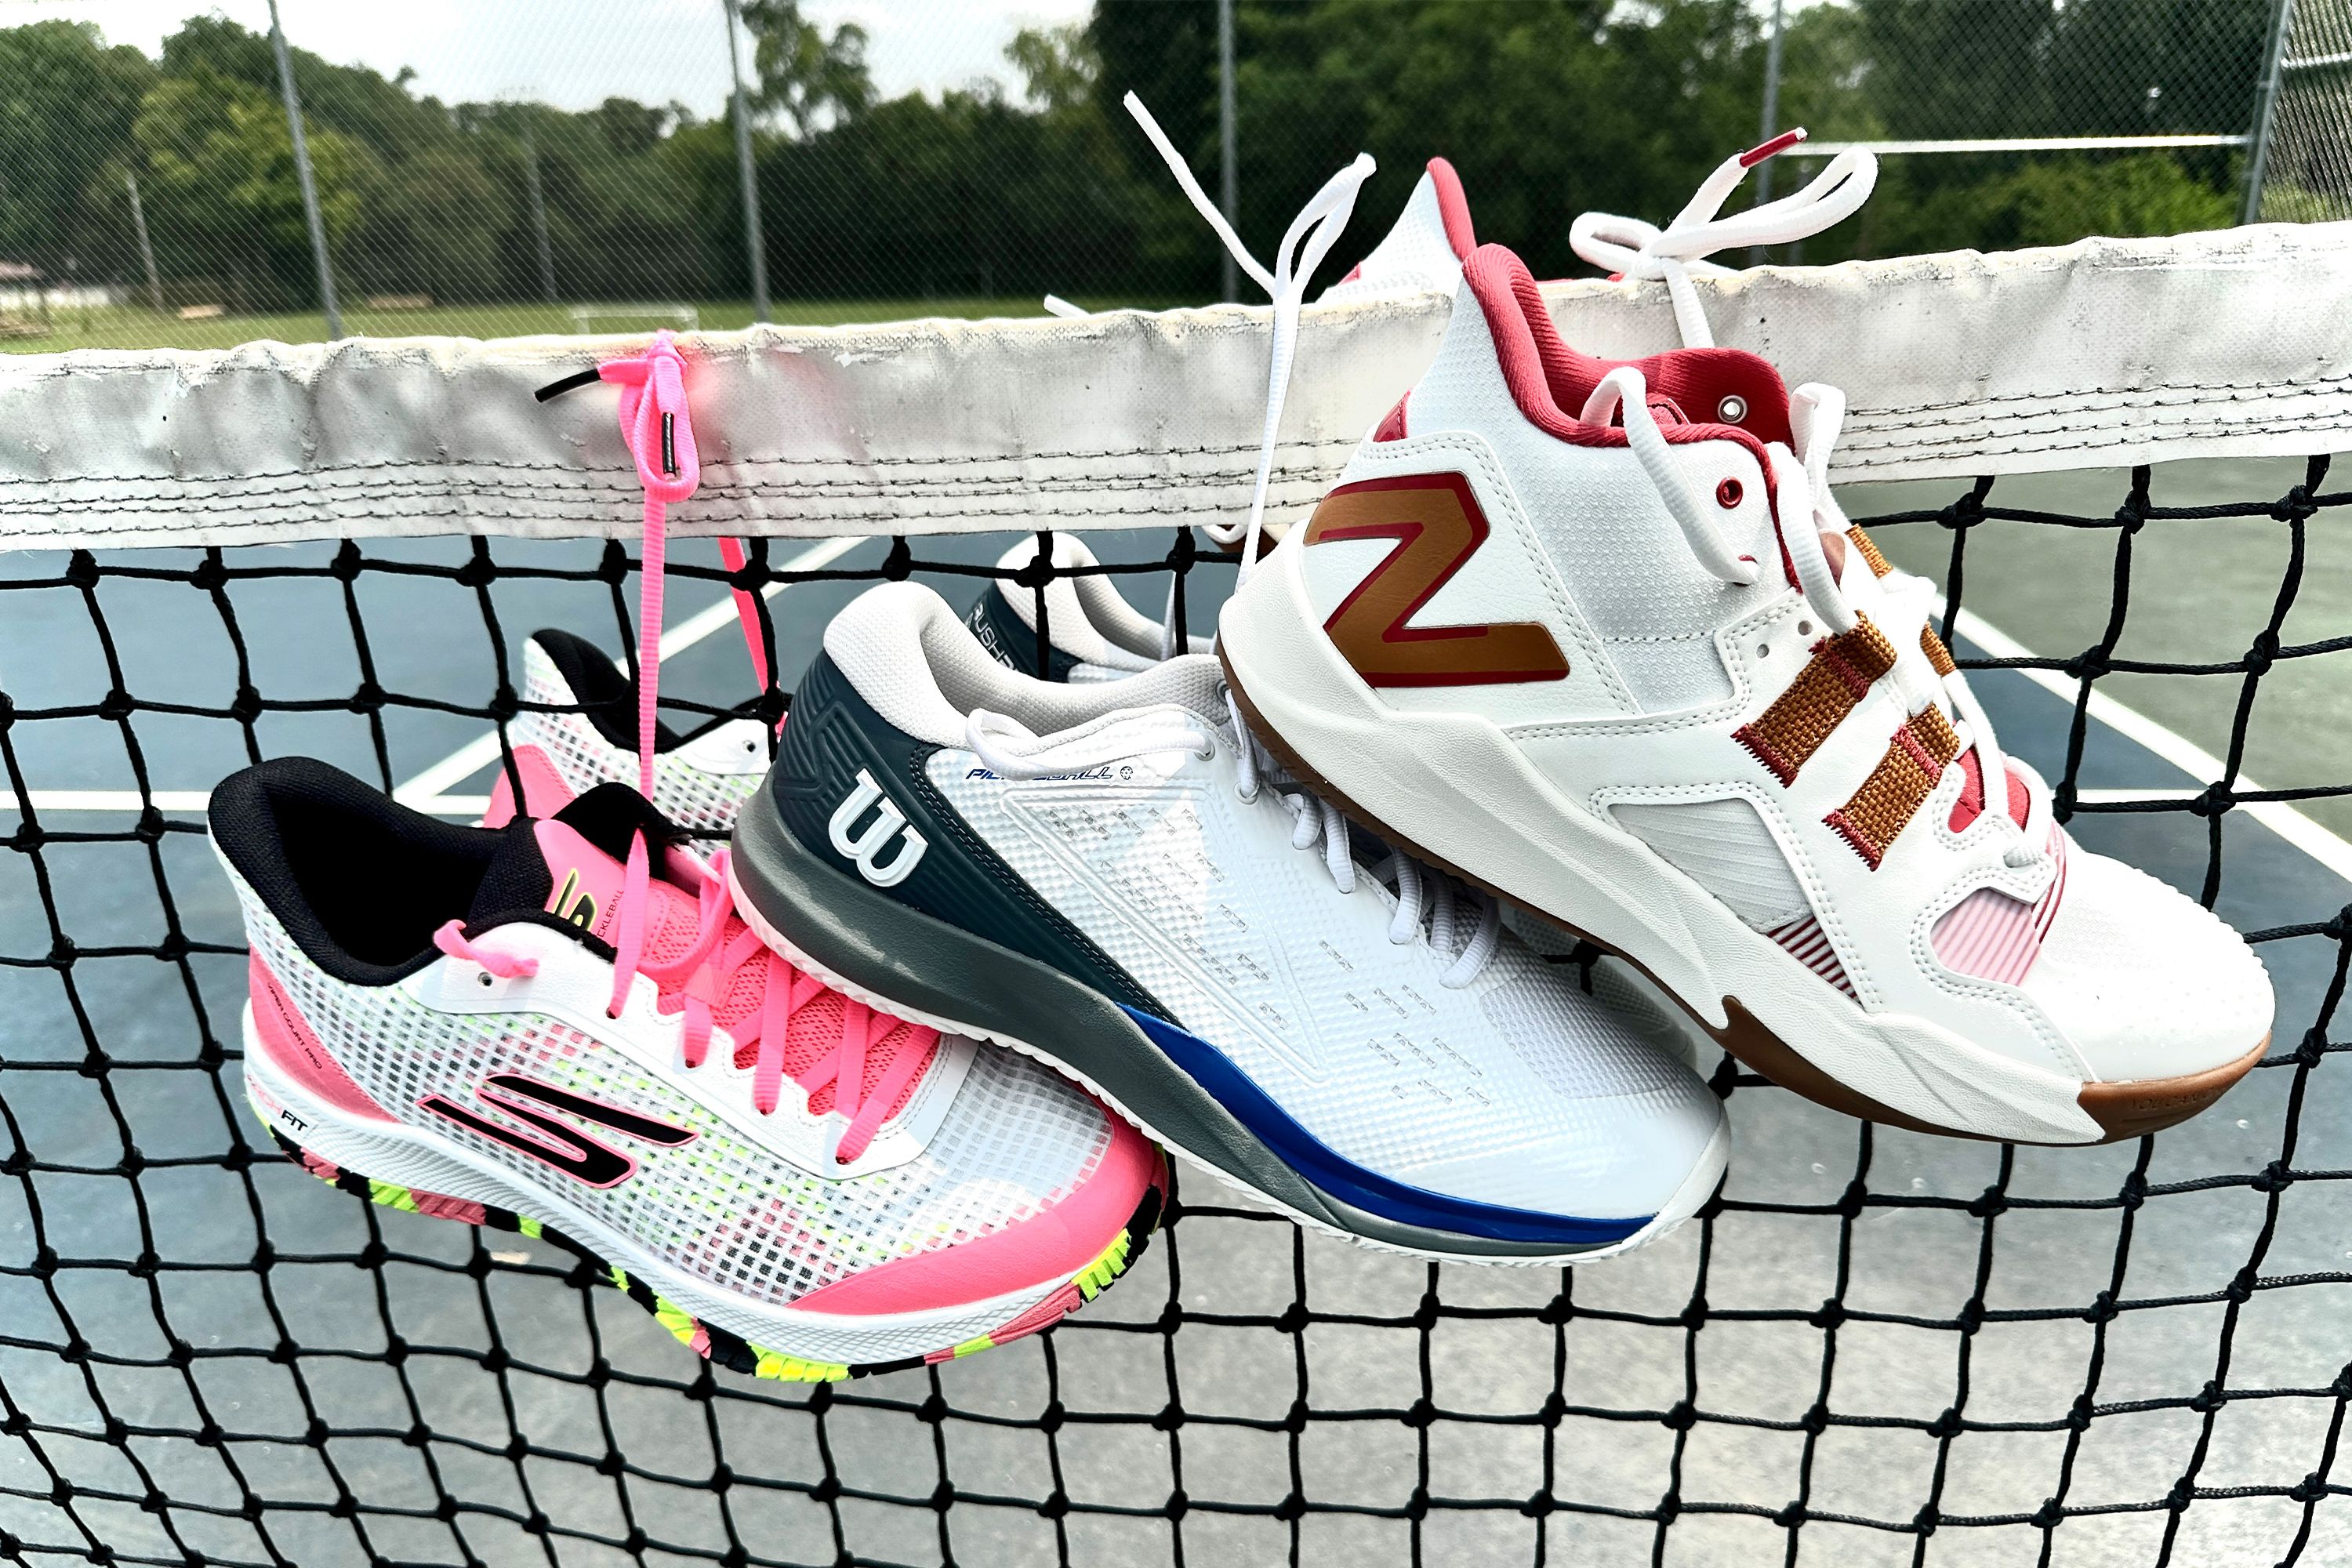 The Best Nike Shoes for Pickleball. Nike.com